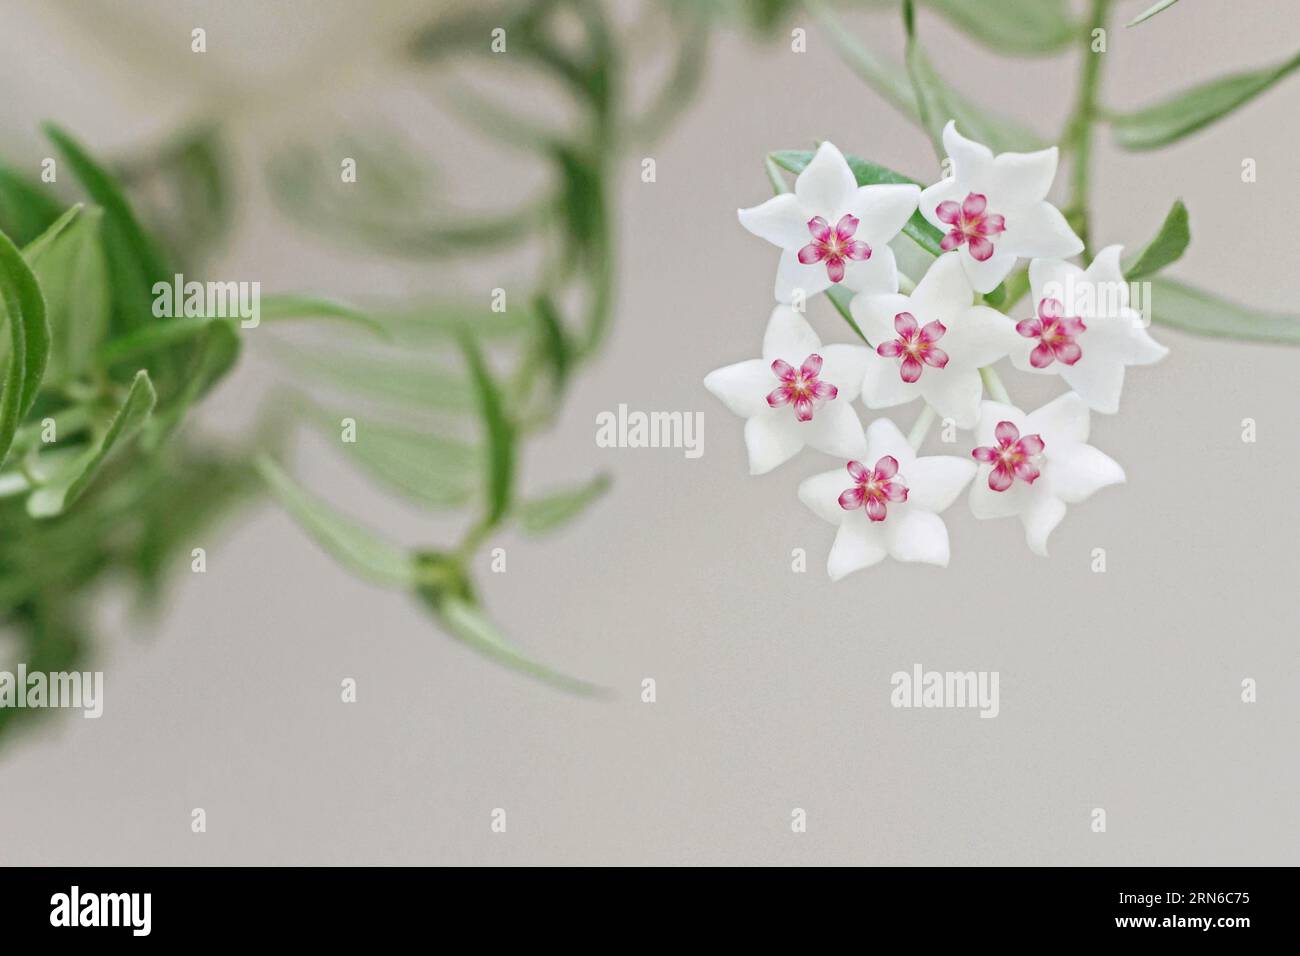 close up of blooming white Hoya bella flower with green leaves Stock Photo